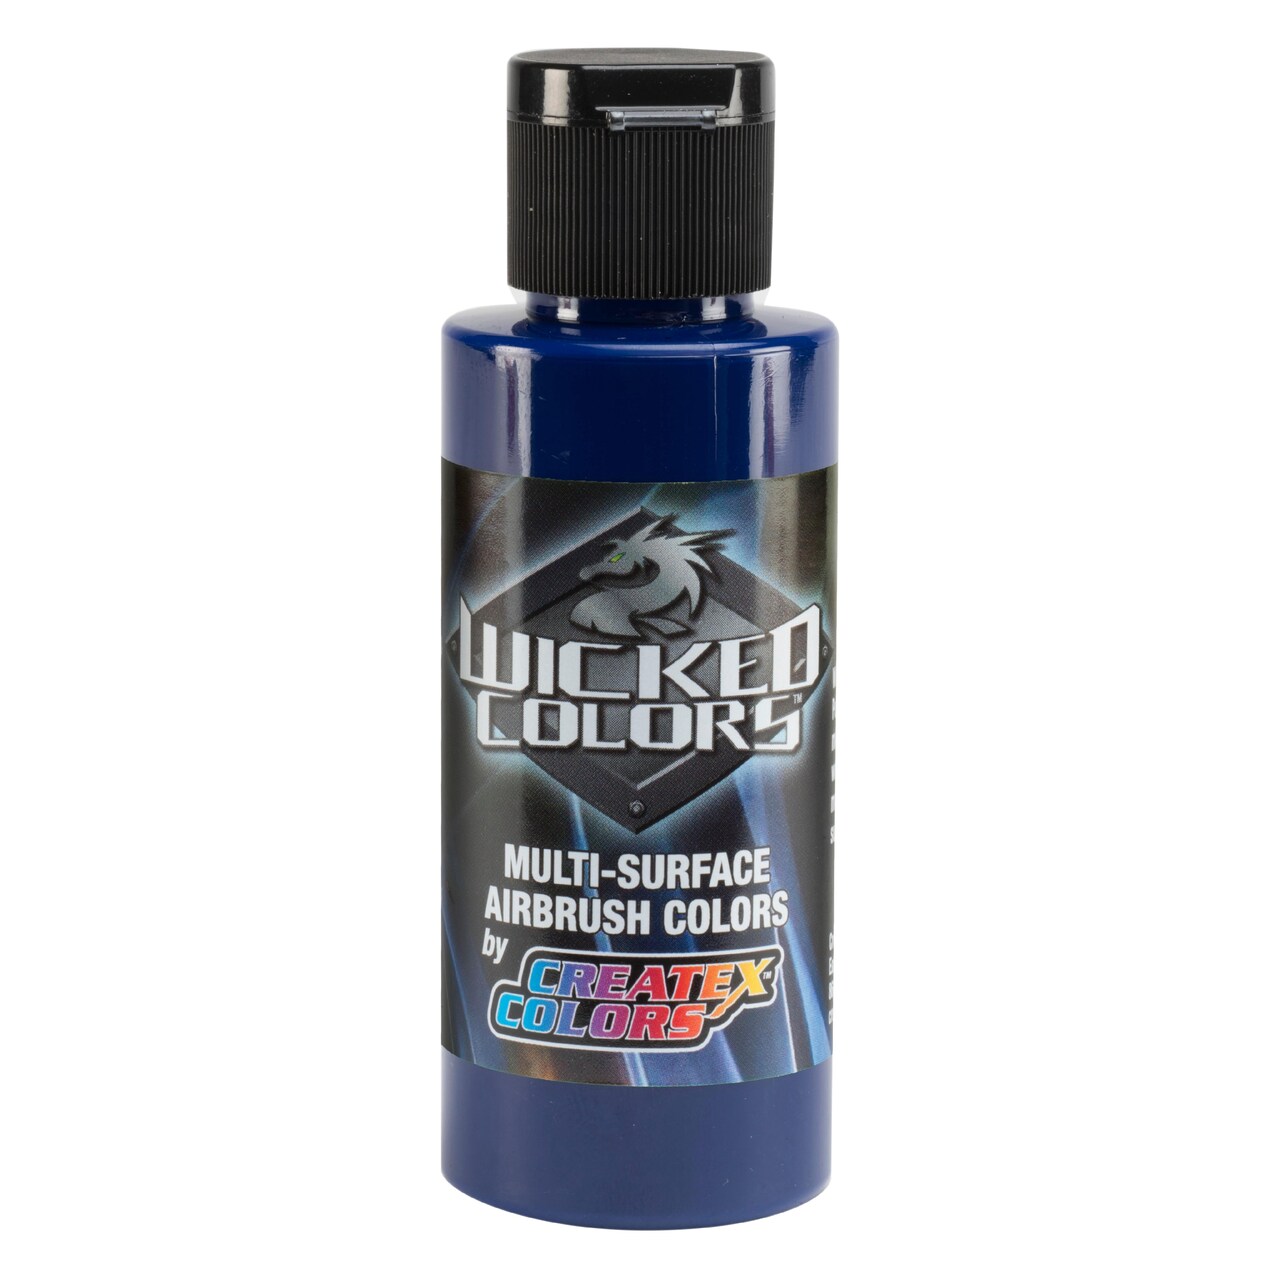 Createx Wicked Airbrush Color, 2 Oz. Detail Cobalt Blue